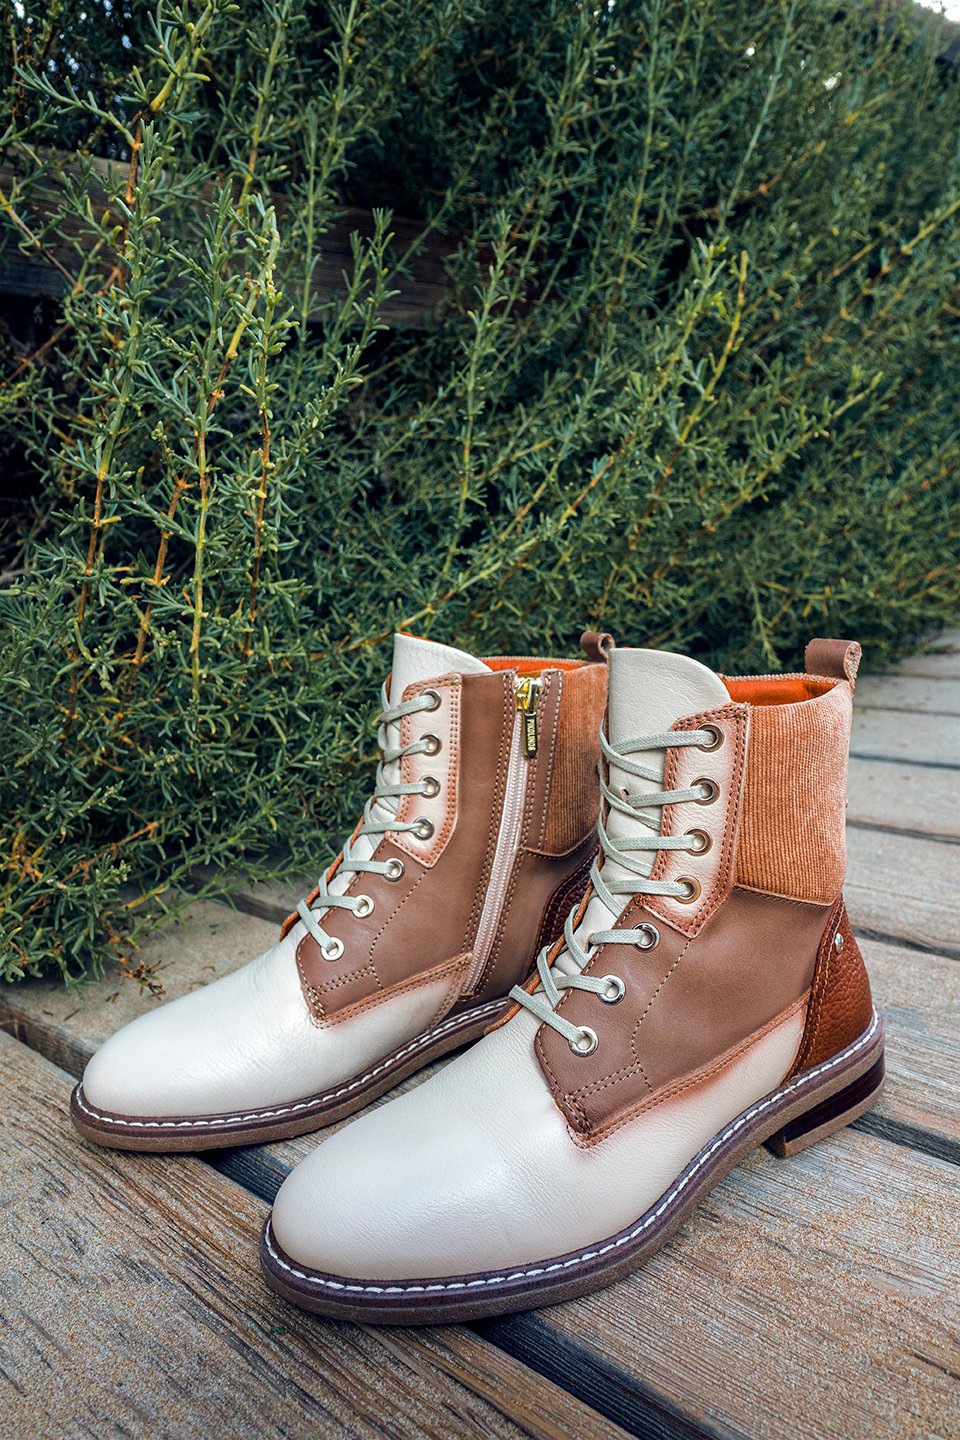 Image of some Pikolinos boots in ivory and brandy colors in a natural environment.